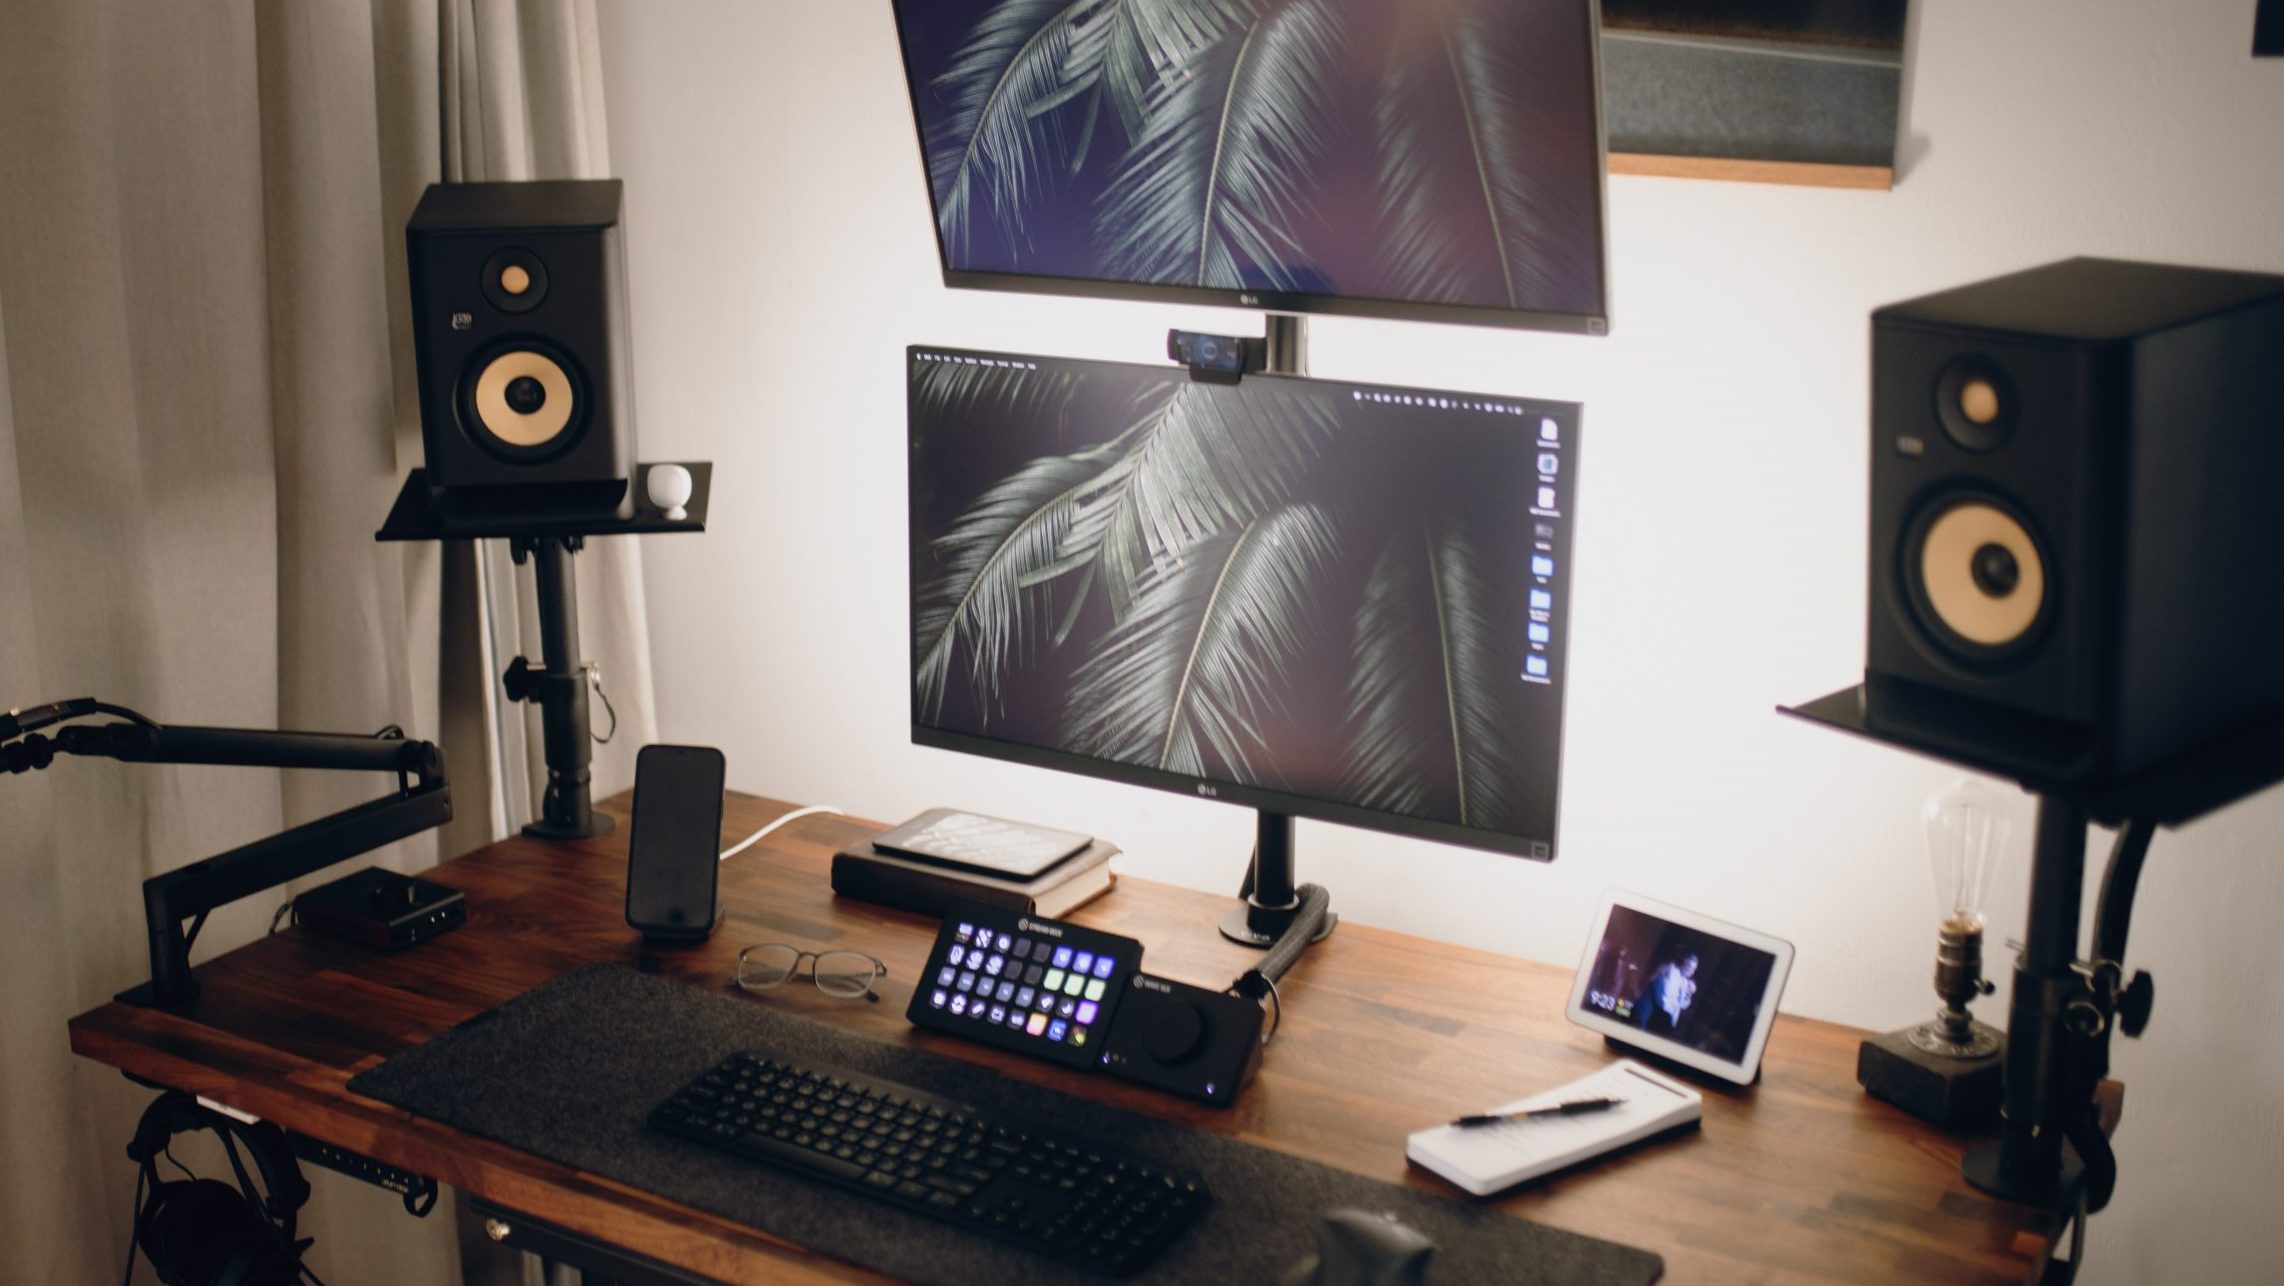 A desktop setup with computer speakers and dual monitors.